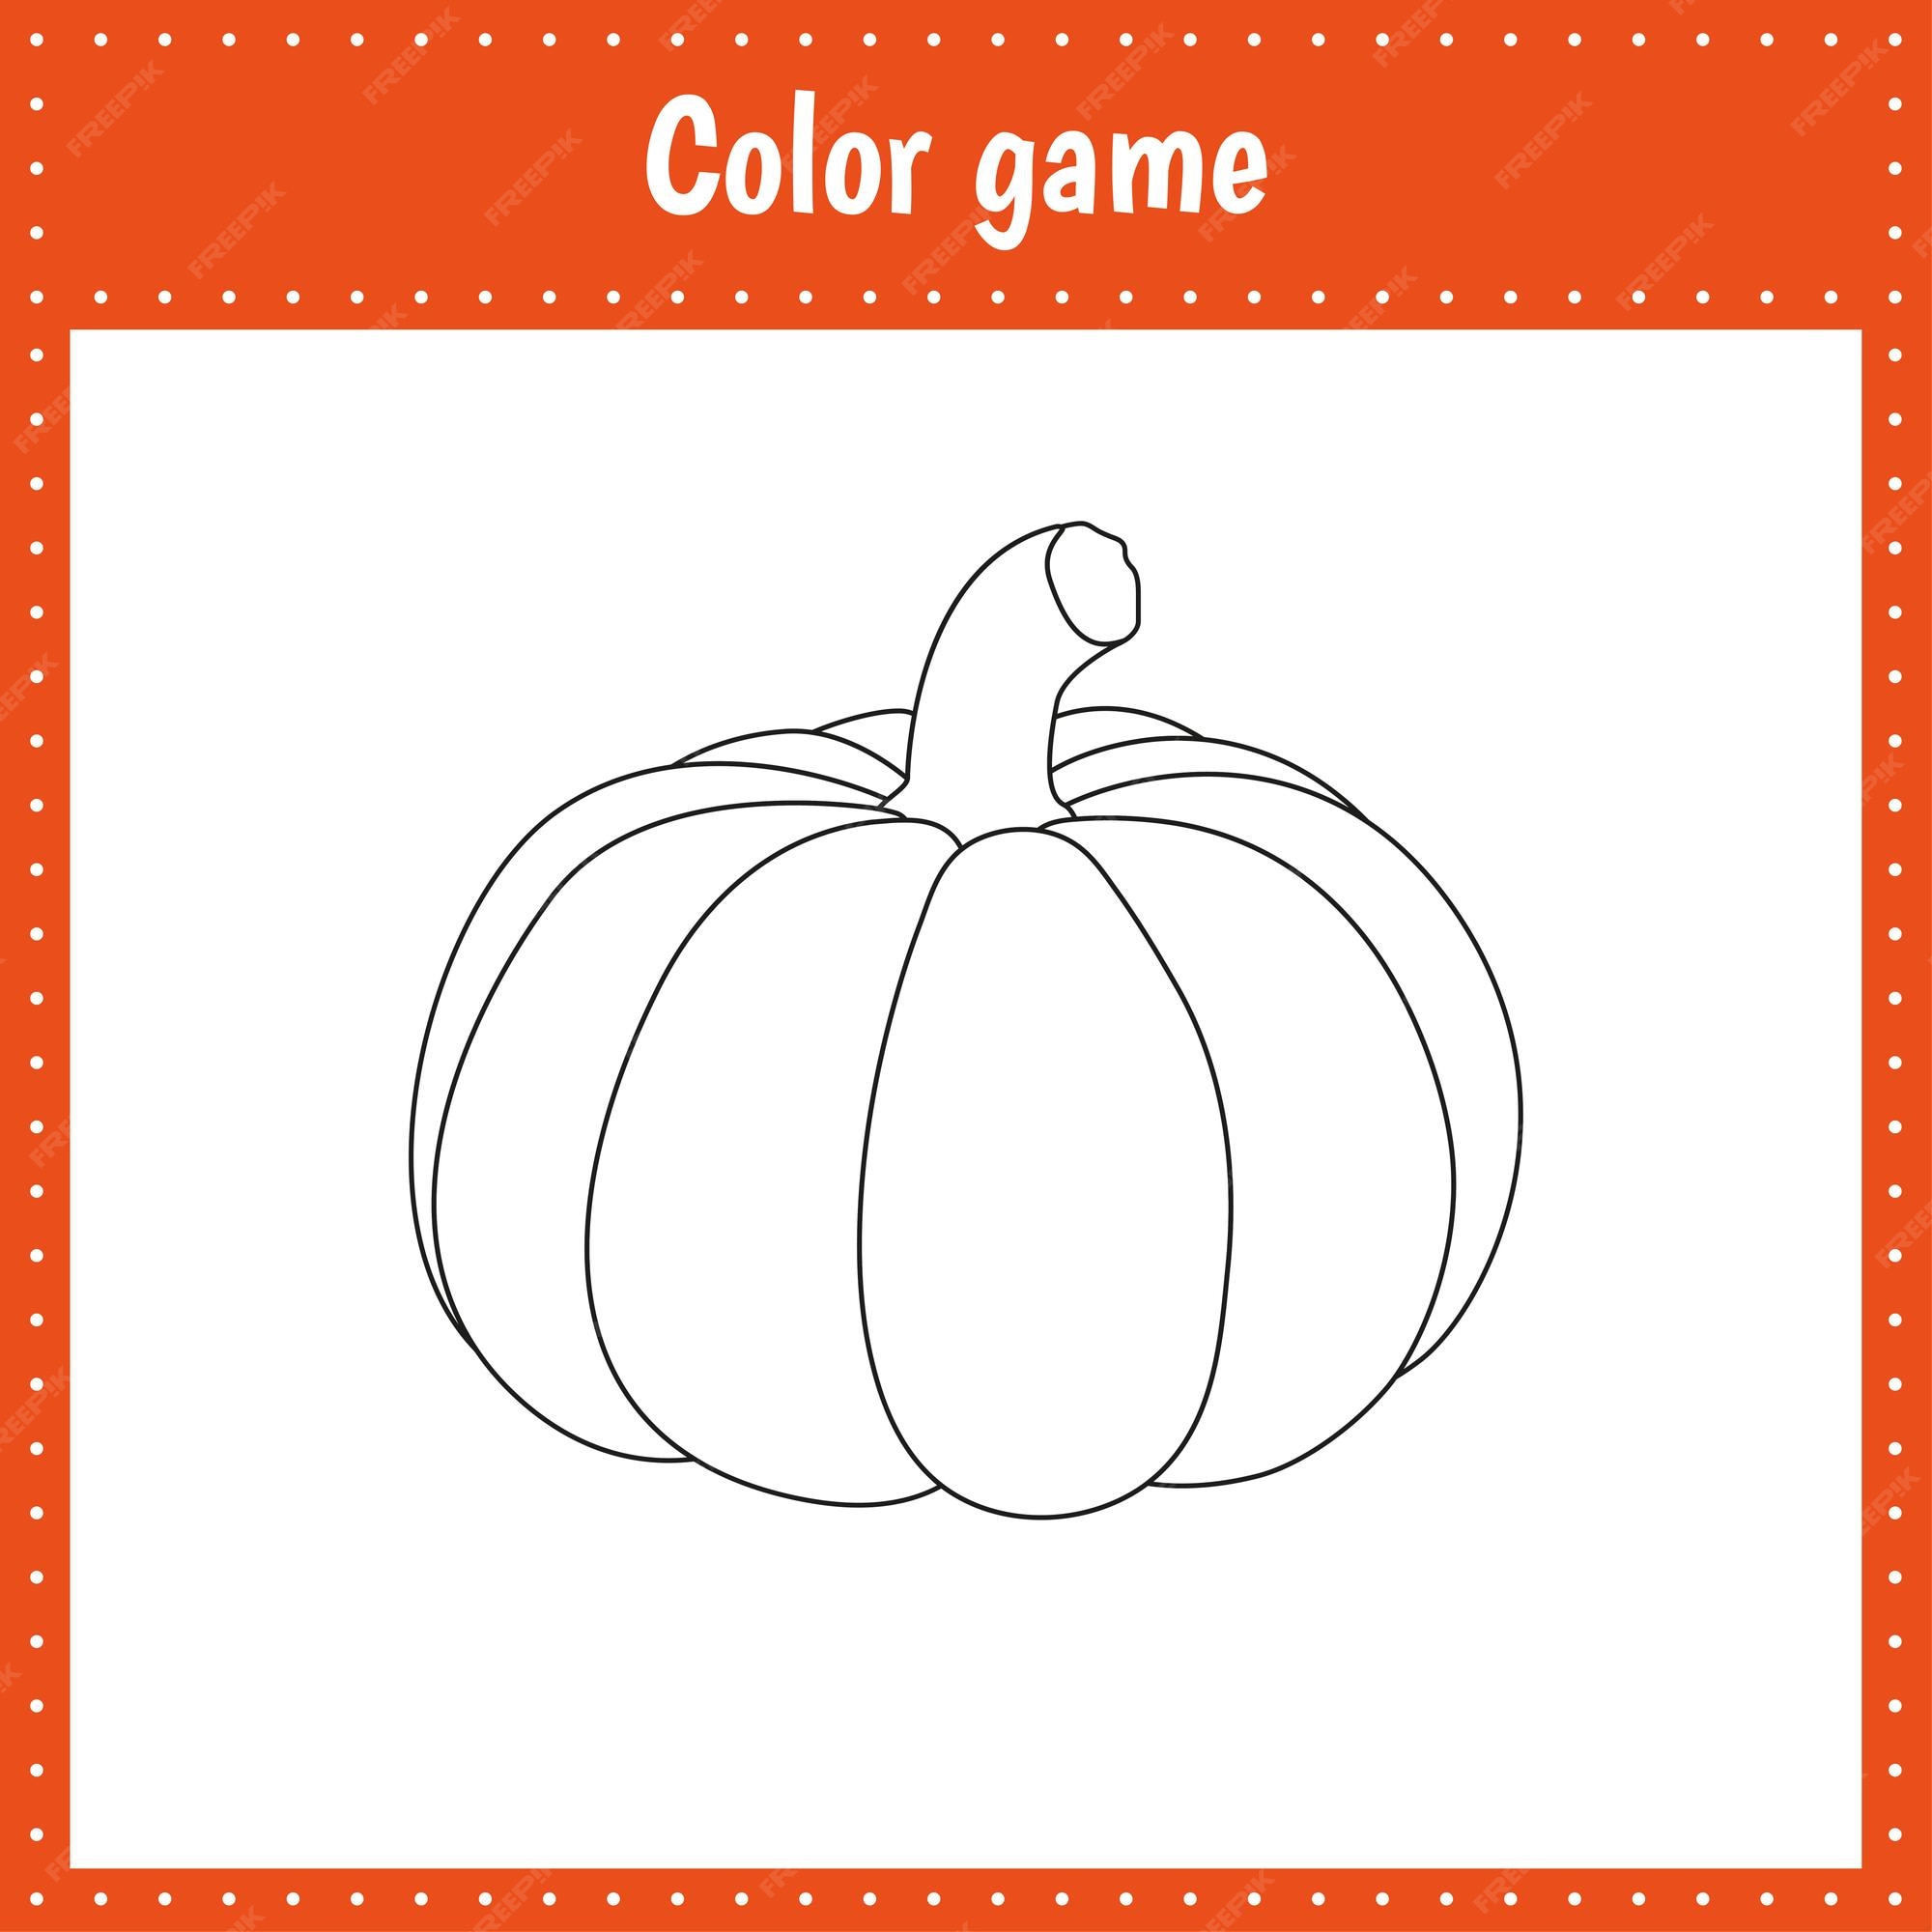 Premium vector coloring page of a pumpkin for kids education and activity vector black and white illustration on white background